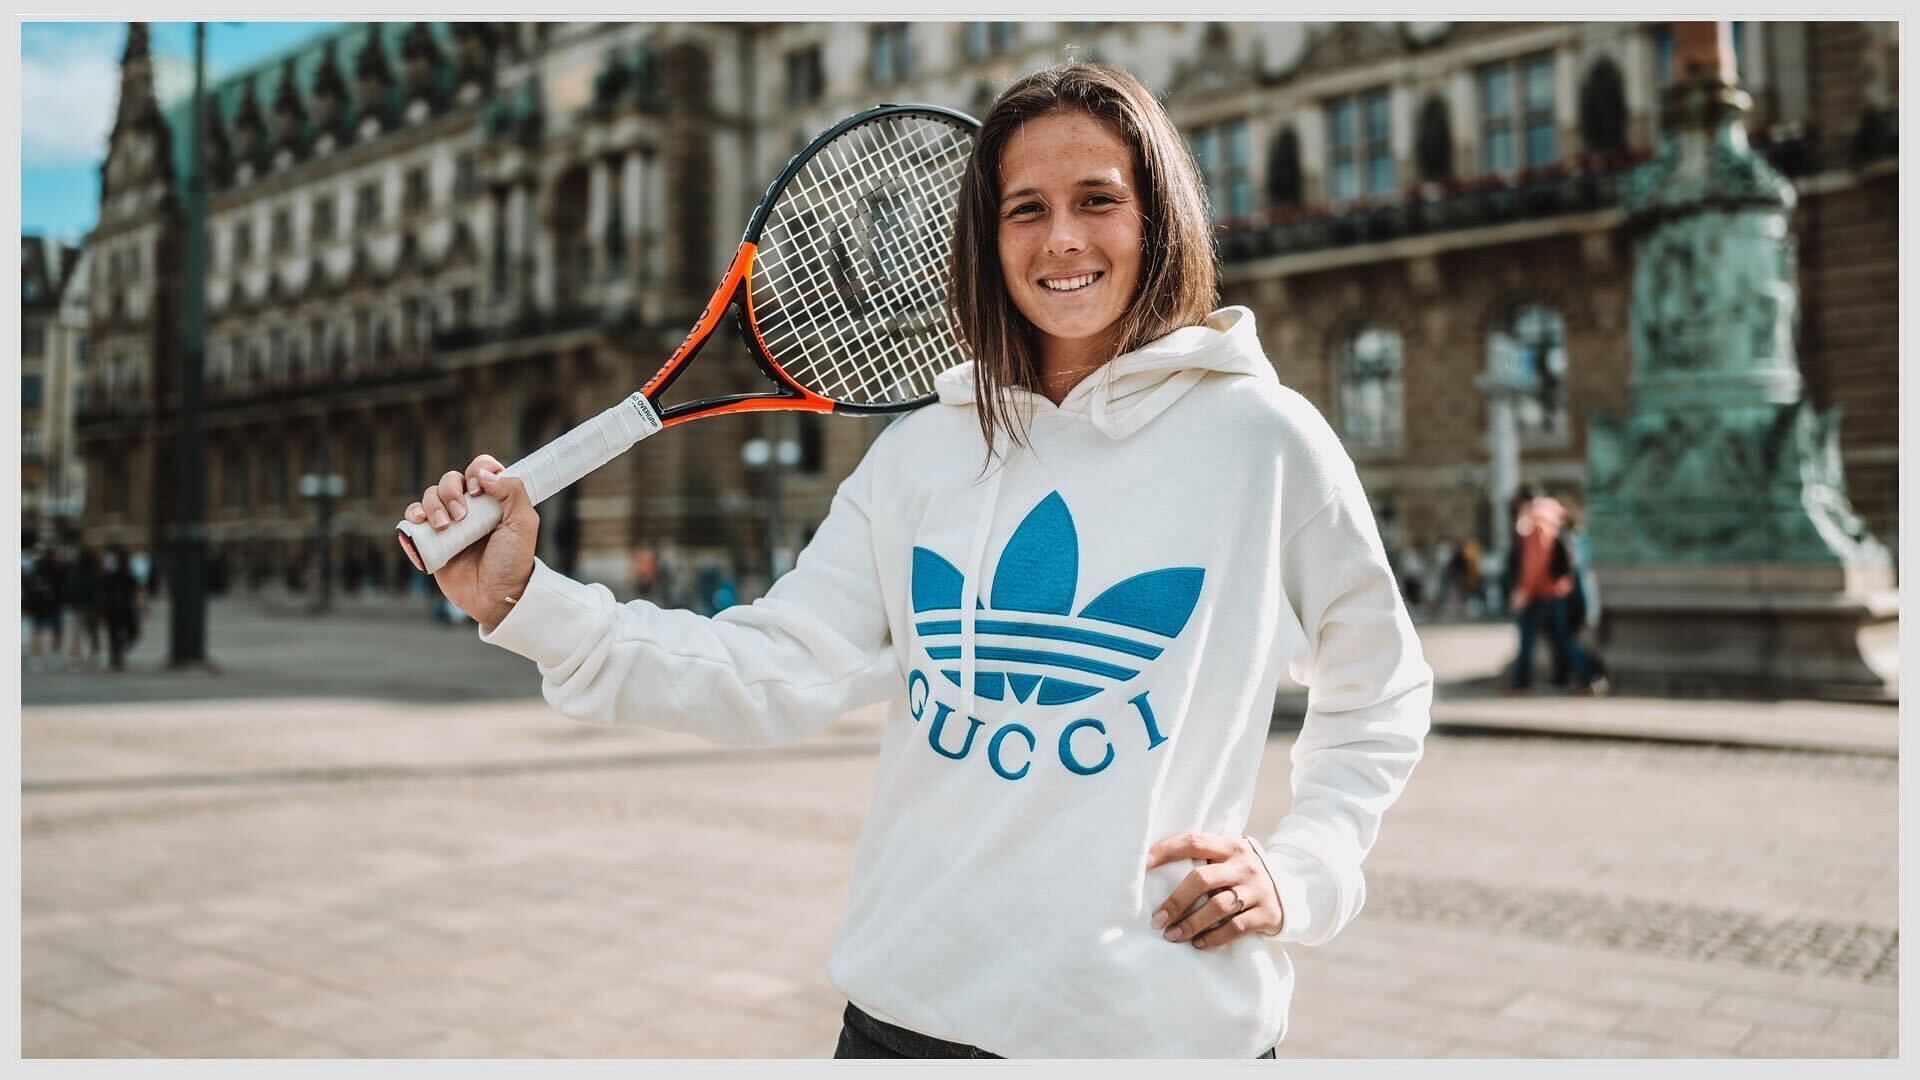 Daria Kasatkina is excited to lend her support to the LGBTQ+ community during the Pride Month.